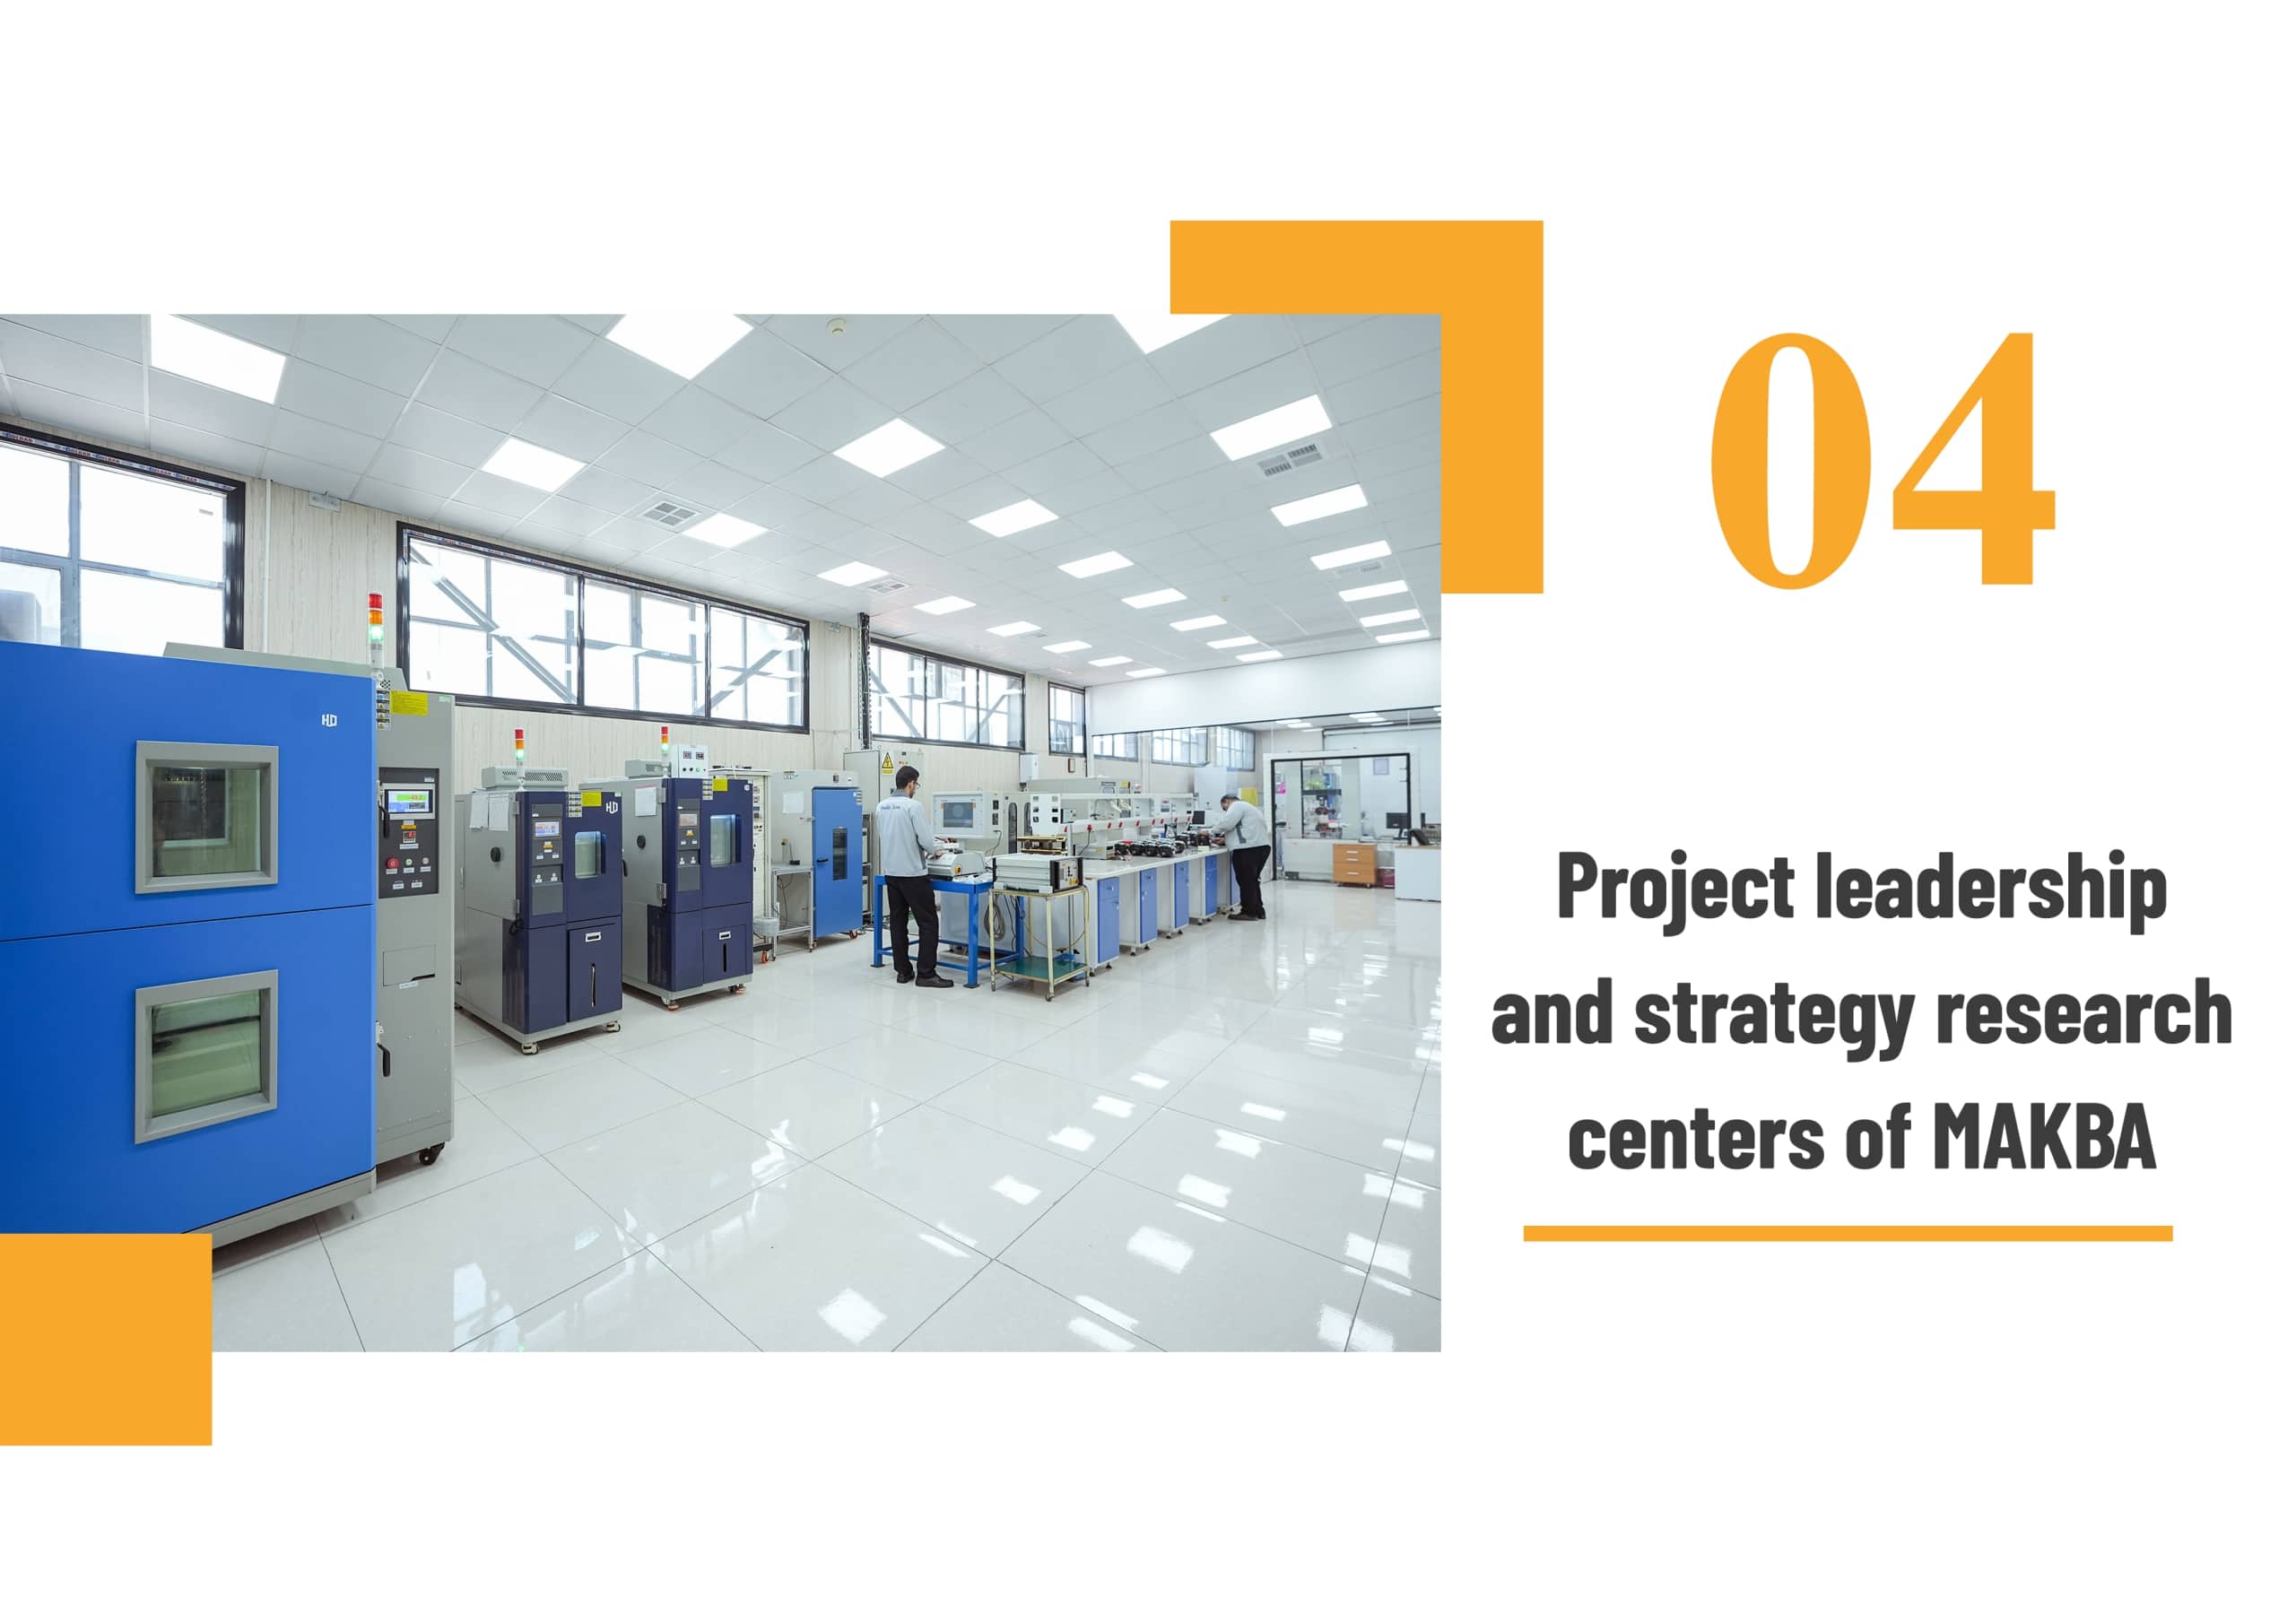 PROJECT LEADERSHIP AND STRATEGY RESEARCHES CENTER OF MAKBA